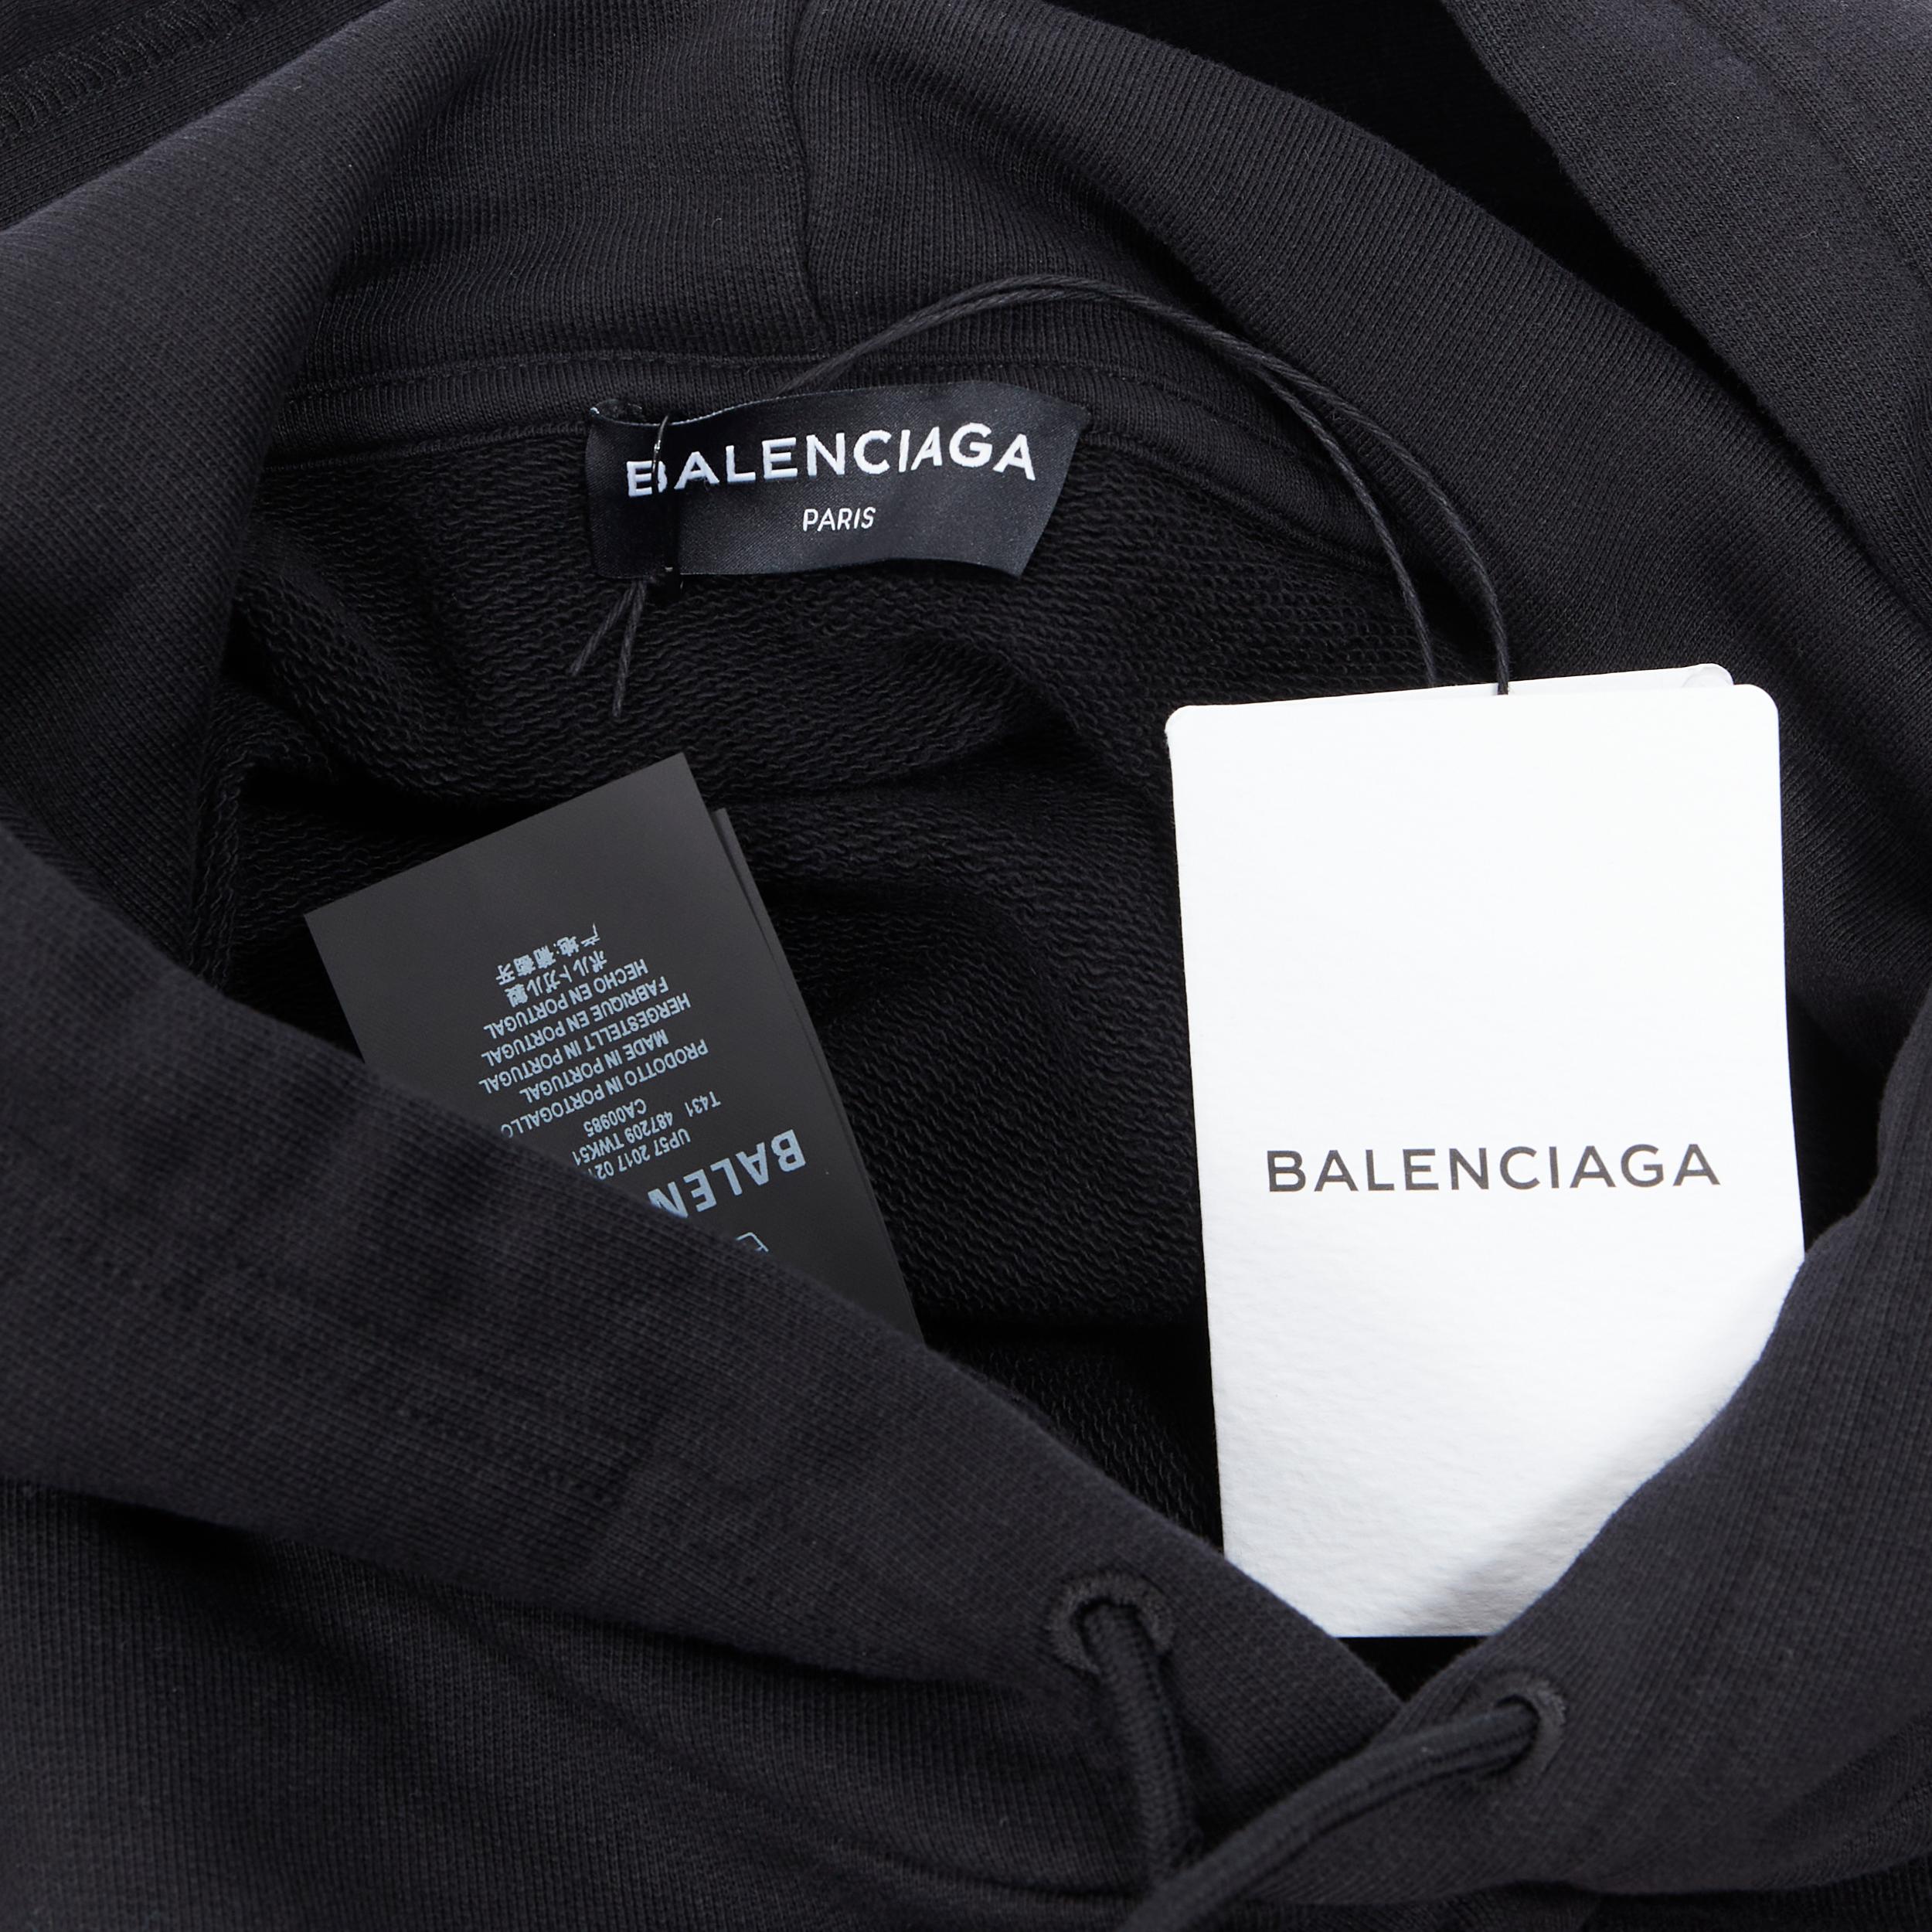 new BALENCIAGA DEMNA 2018 Sinners logo embroidery black cotton hoodie pullover L 1